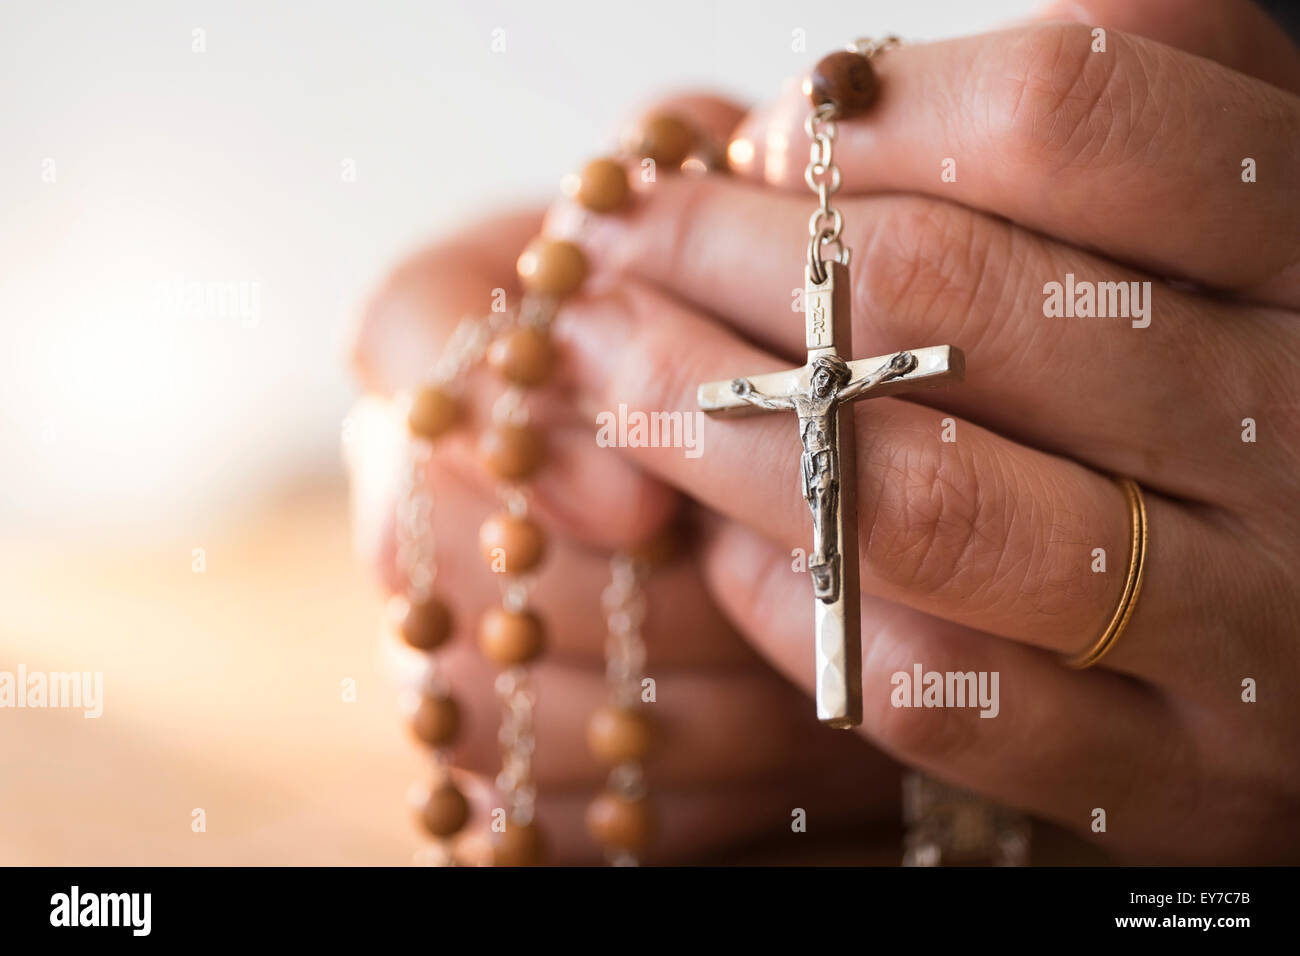 Woman praying with rosary beads in hands Stock Photo